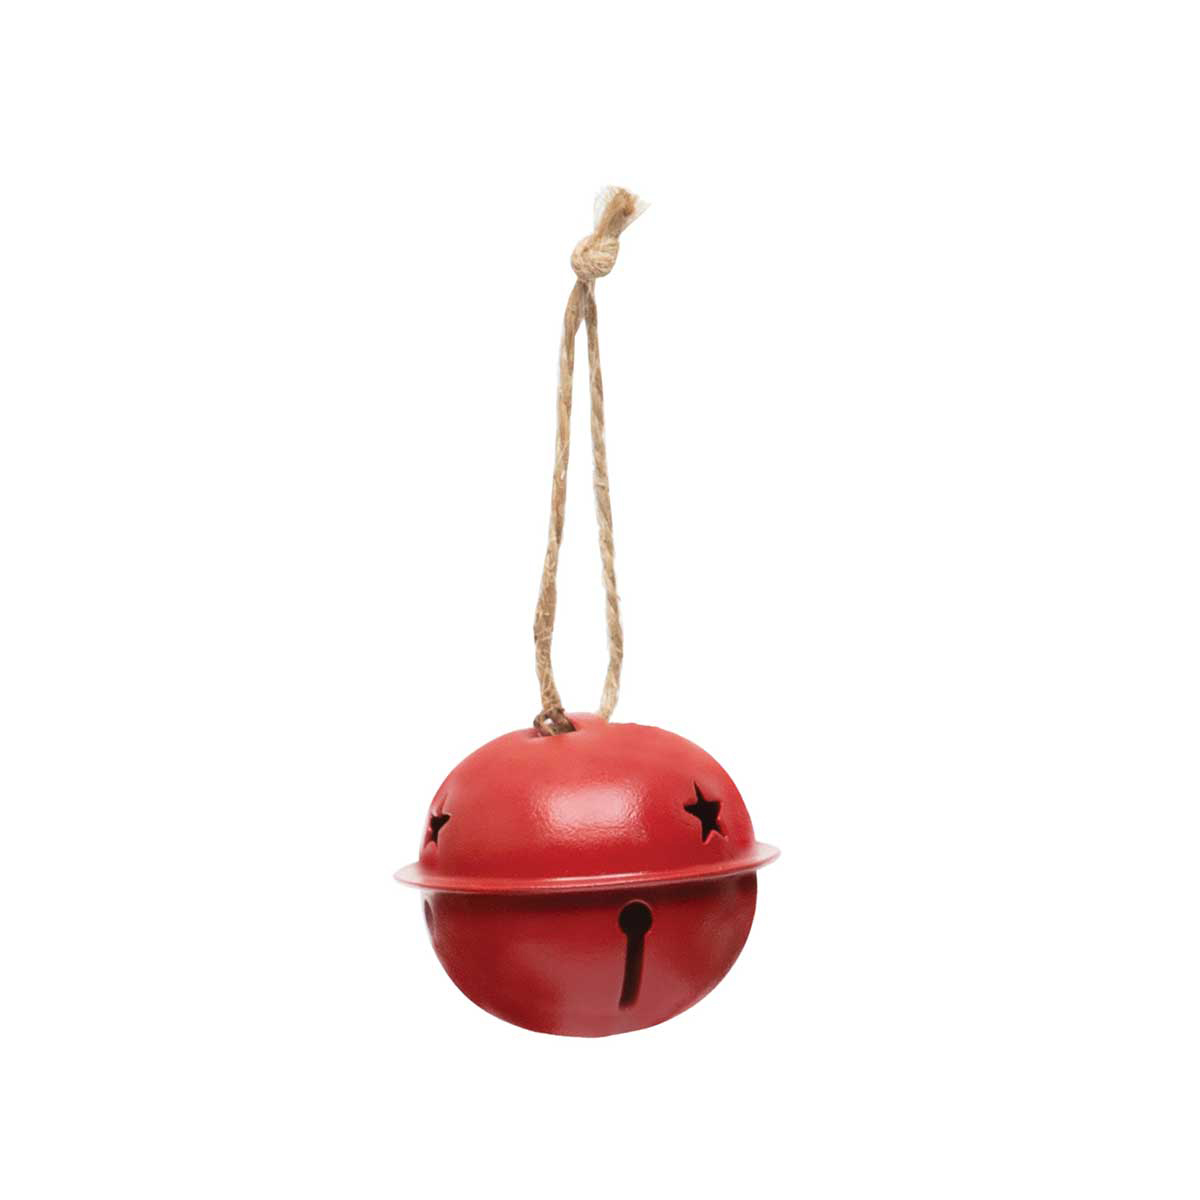 METAL JINGLE BELL RED SET OF 6 SMALL